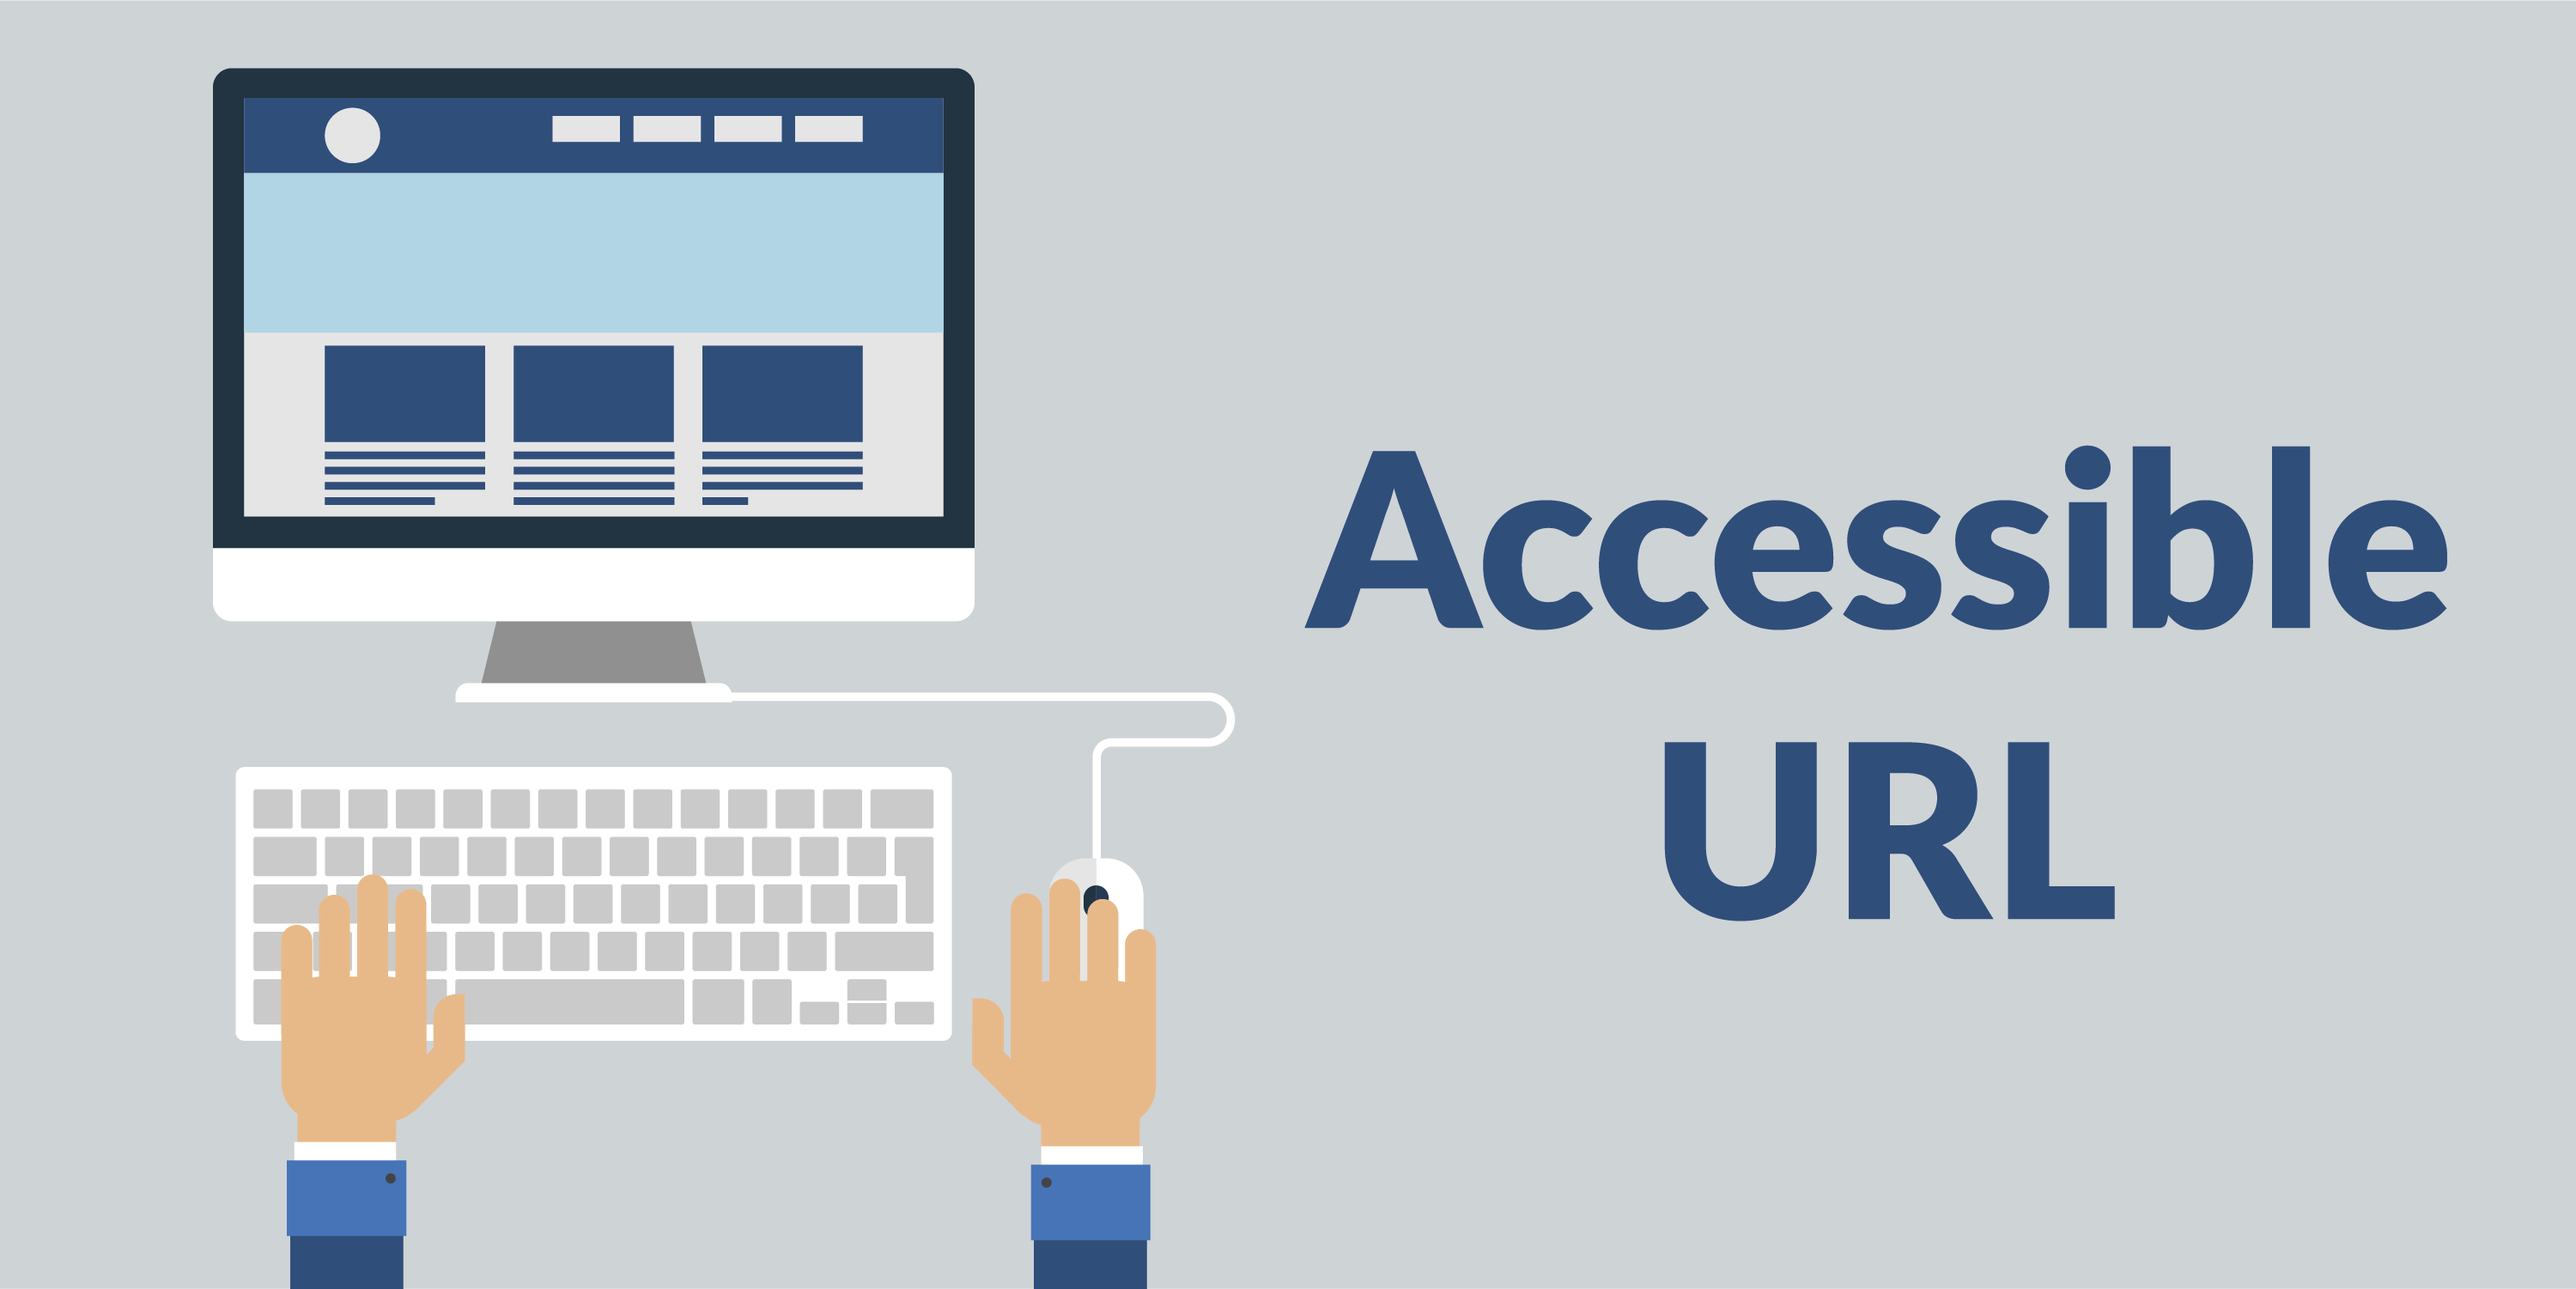 ACCESSIBLE URL